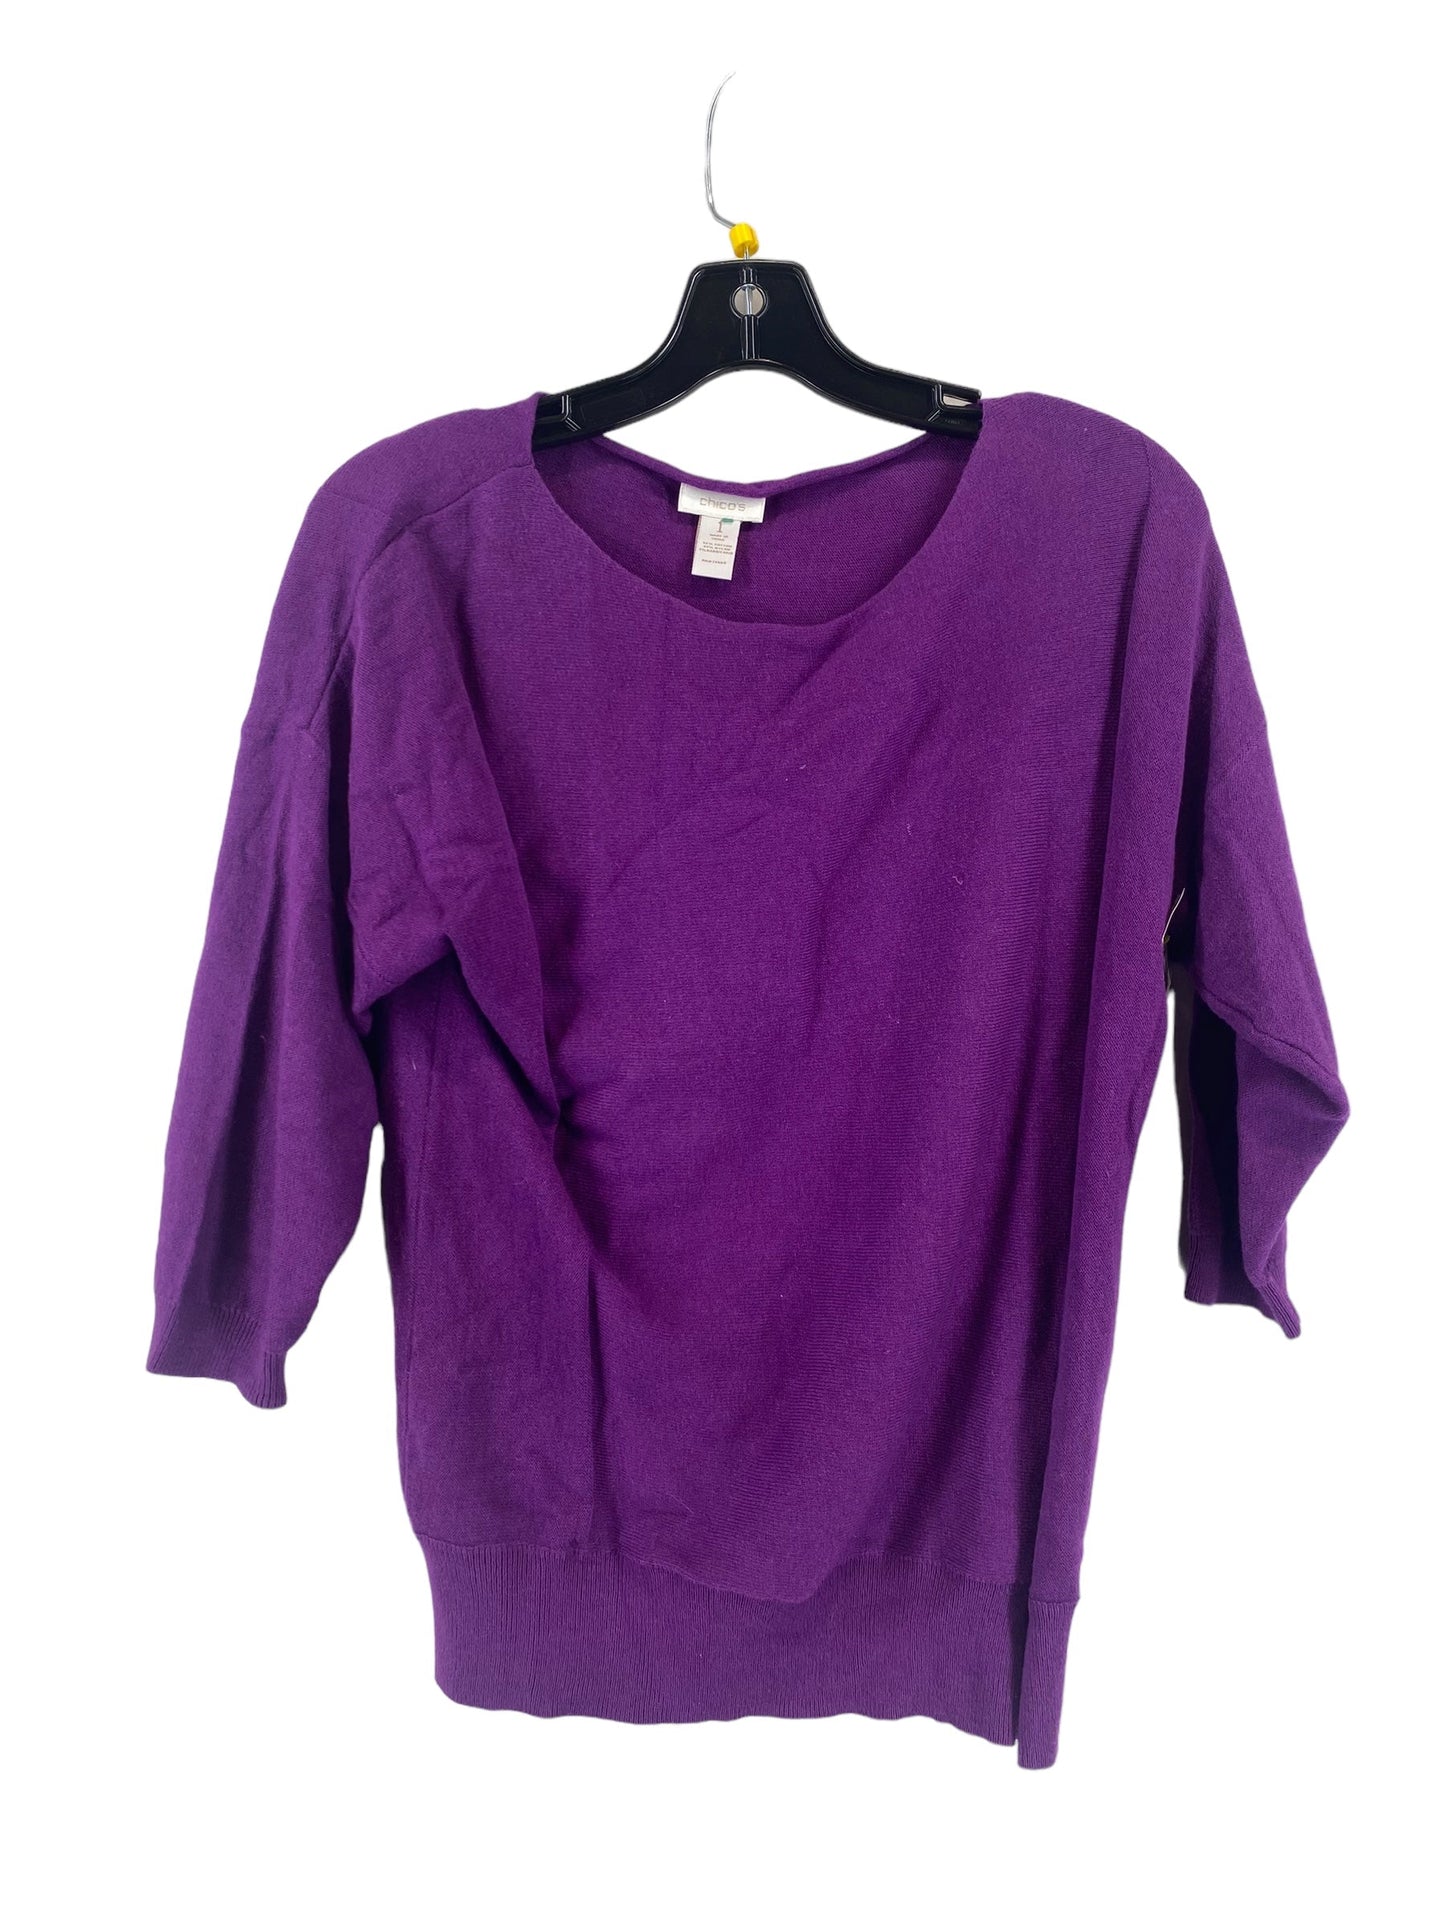 Purple Top Long Sleeve Chicos, Size 1